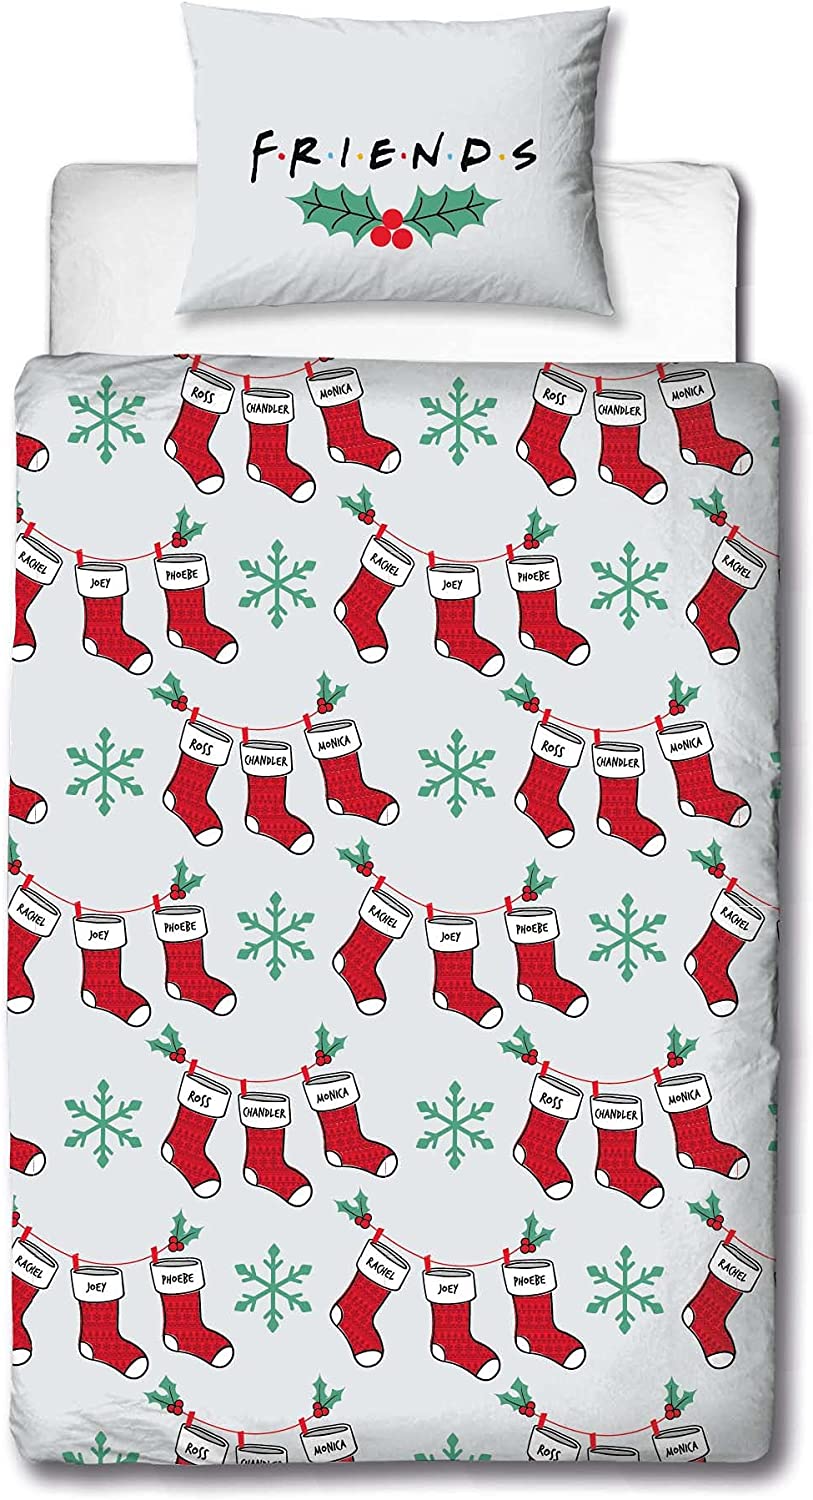 Friends Officially Licensed Duvet Cover Set Holly Design | Reversible 2 Sided Be